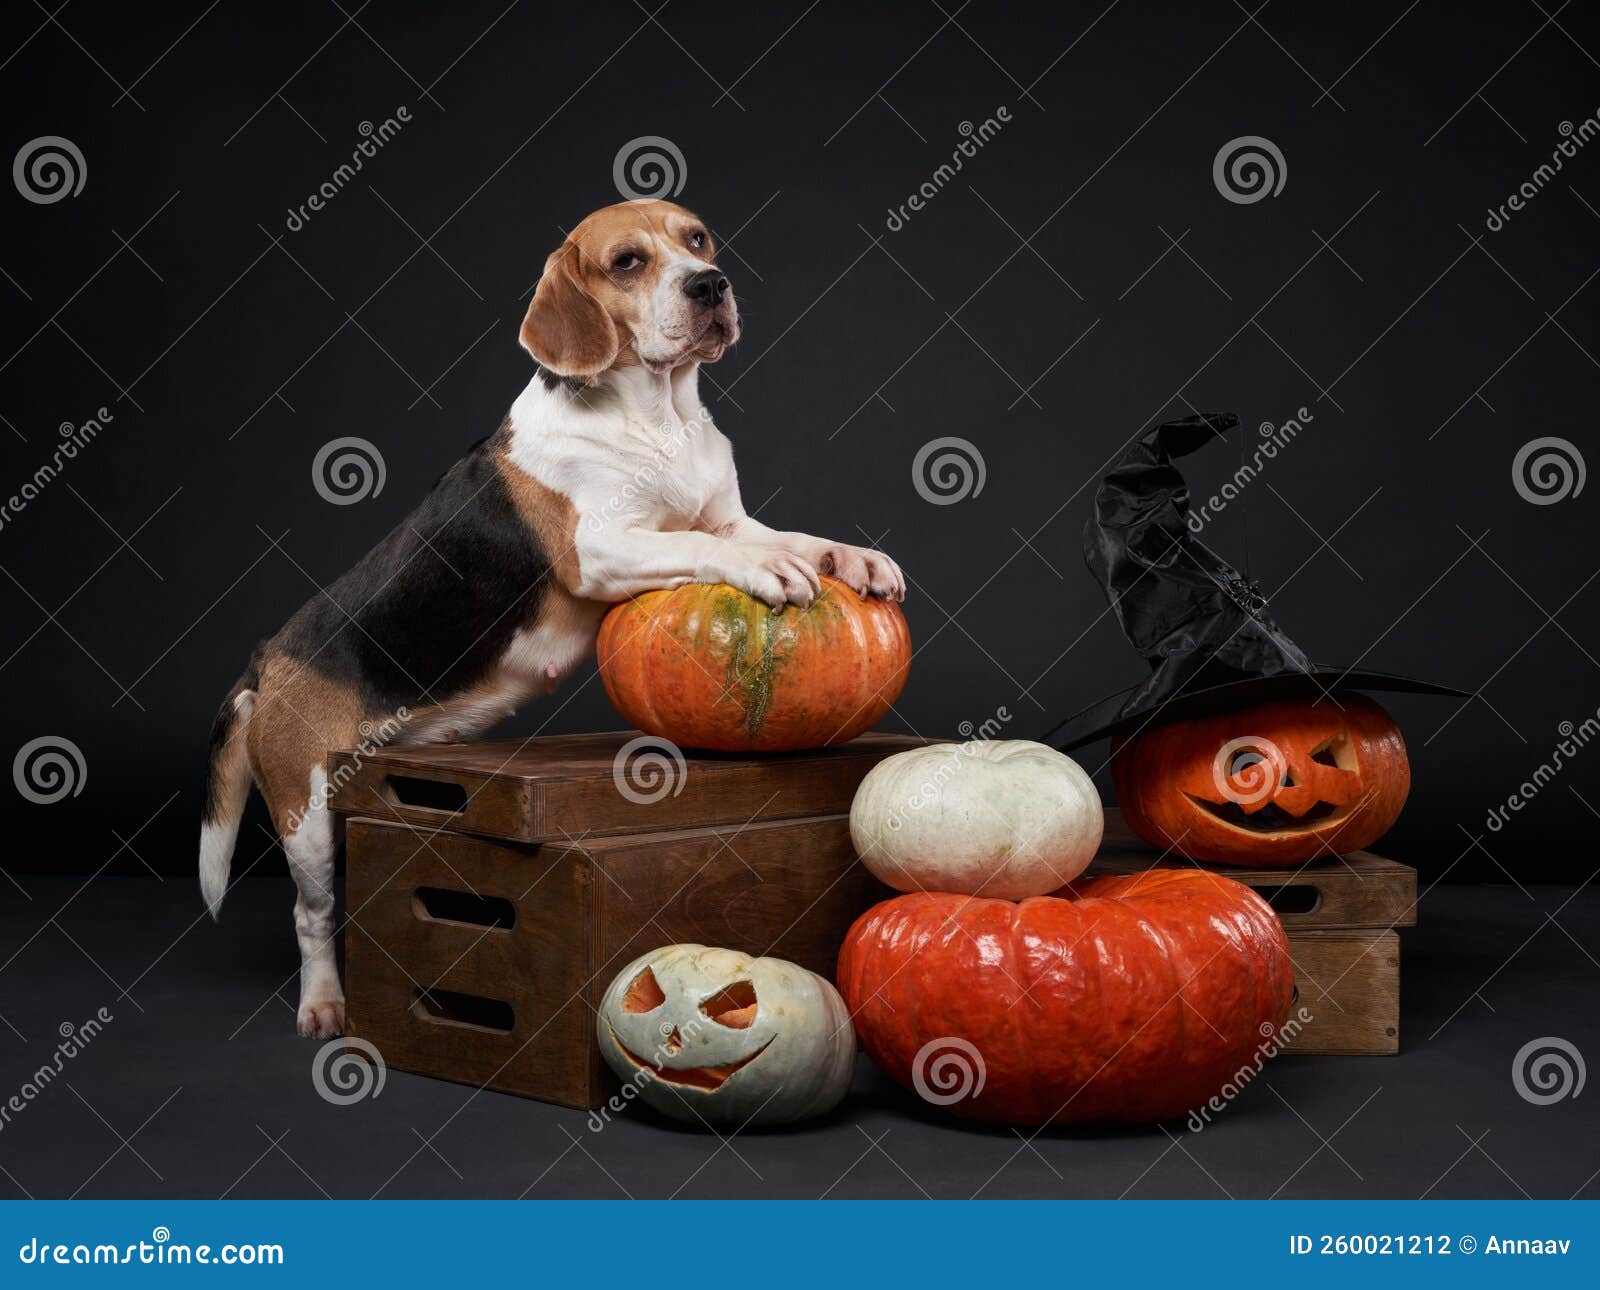 Funny Dog with Halloween Decor. the Beagle Put Its Paws on the ...